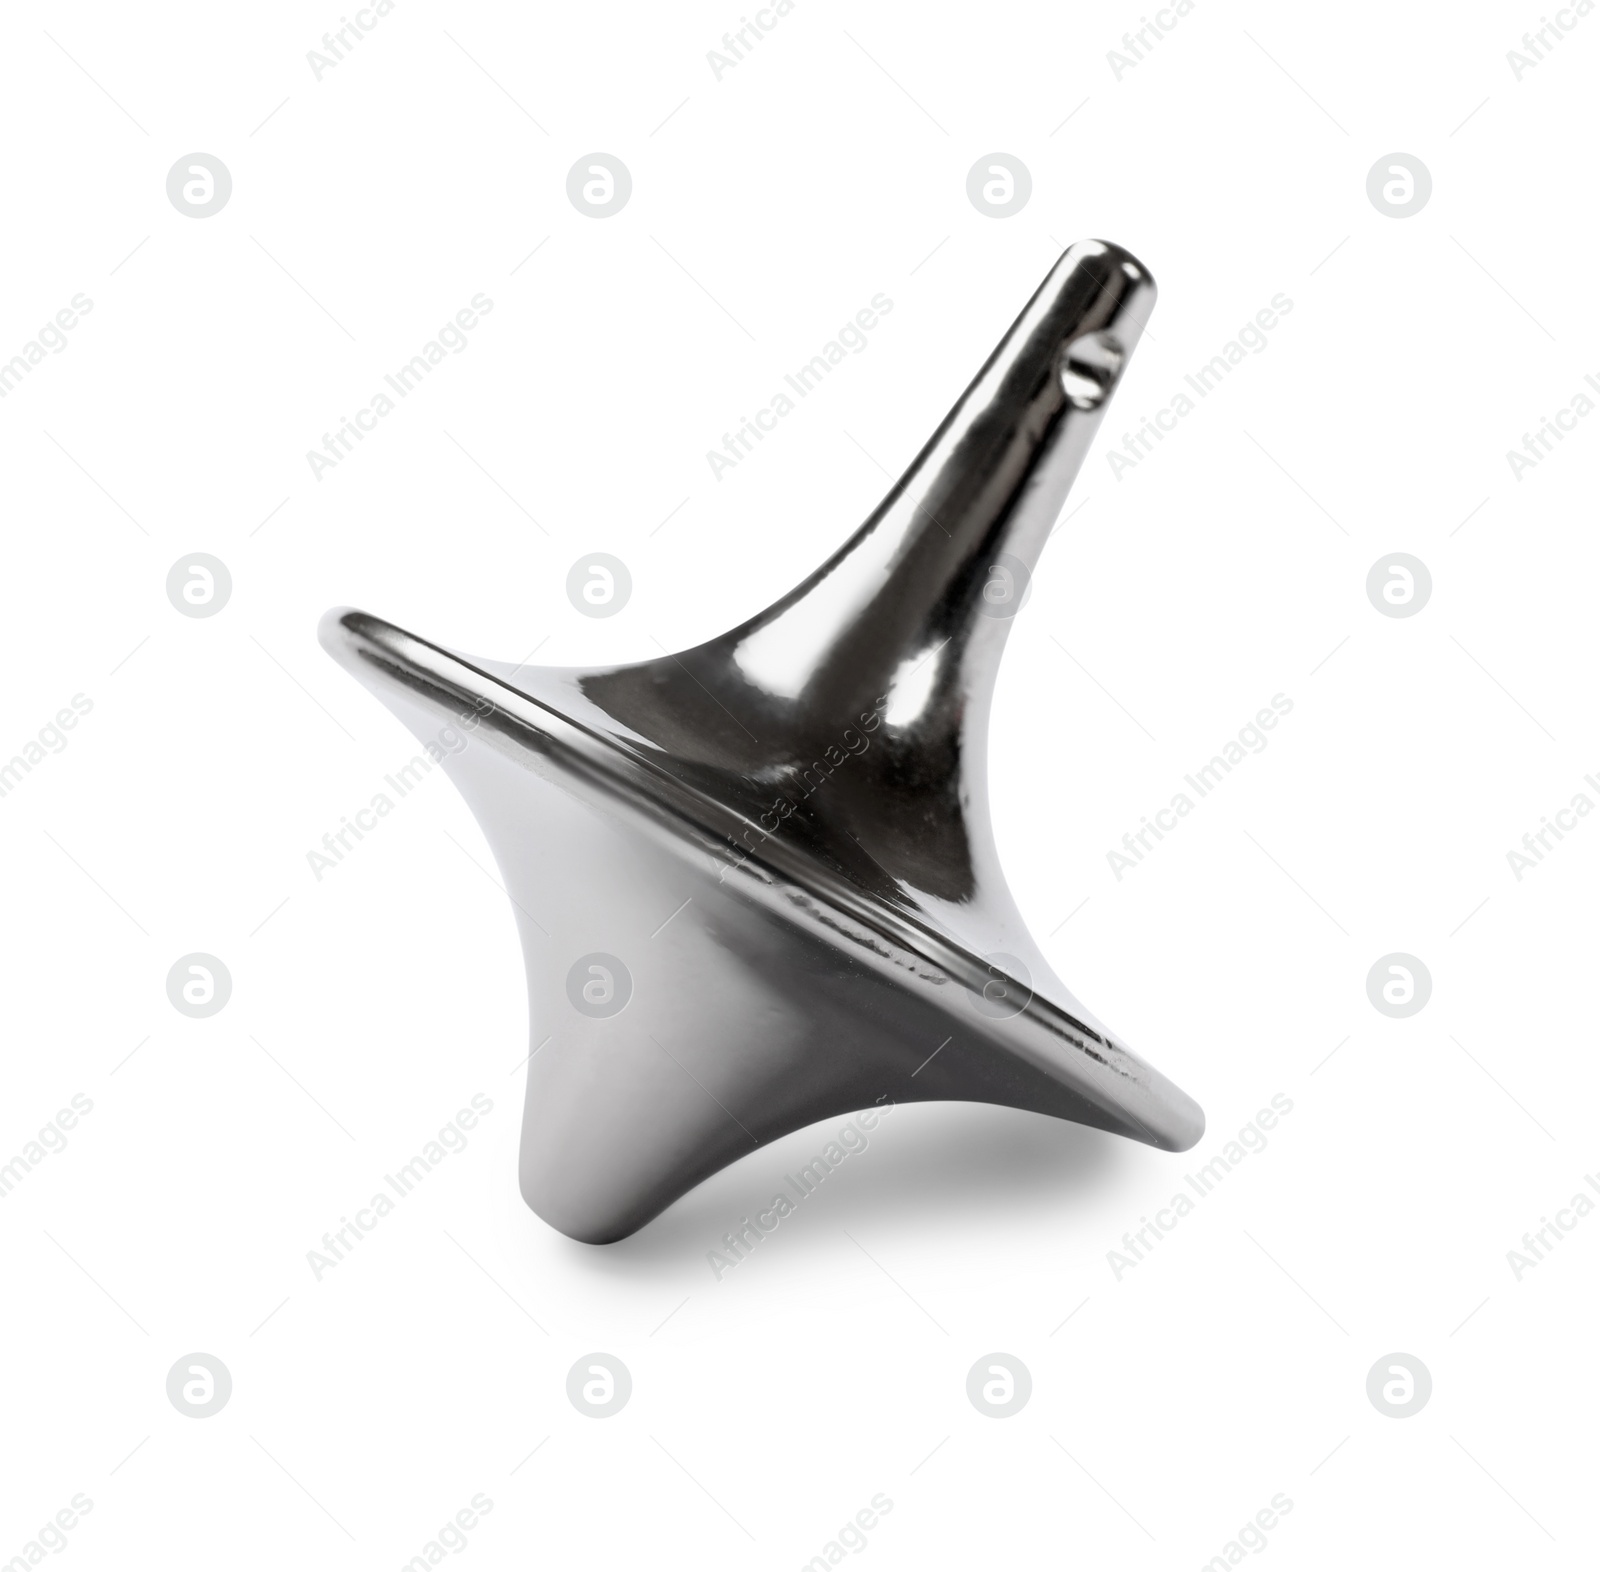 Photo of One silver spinning top on white background